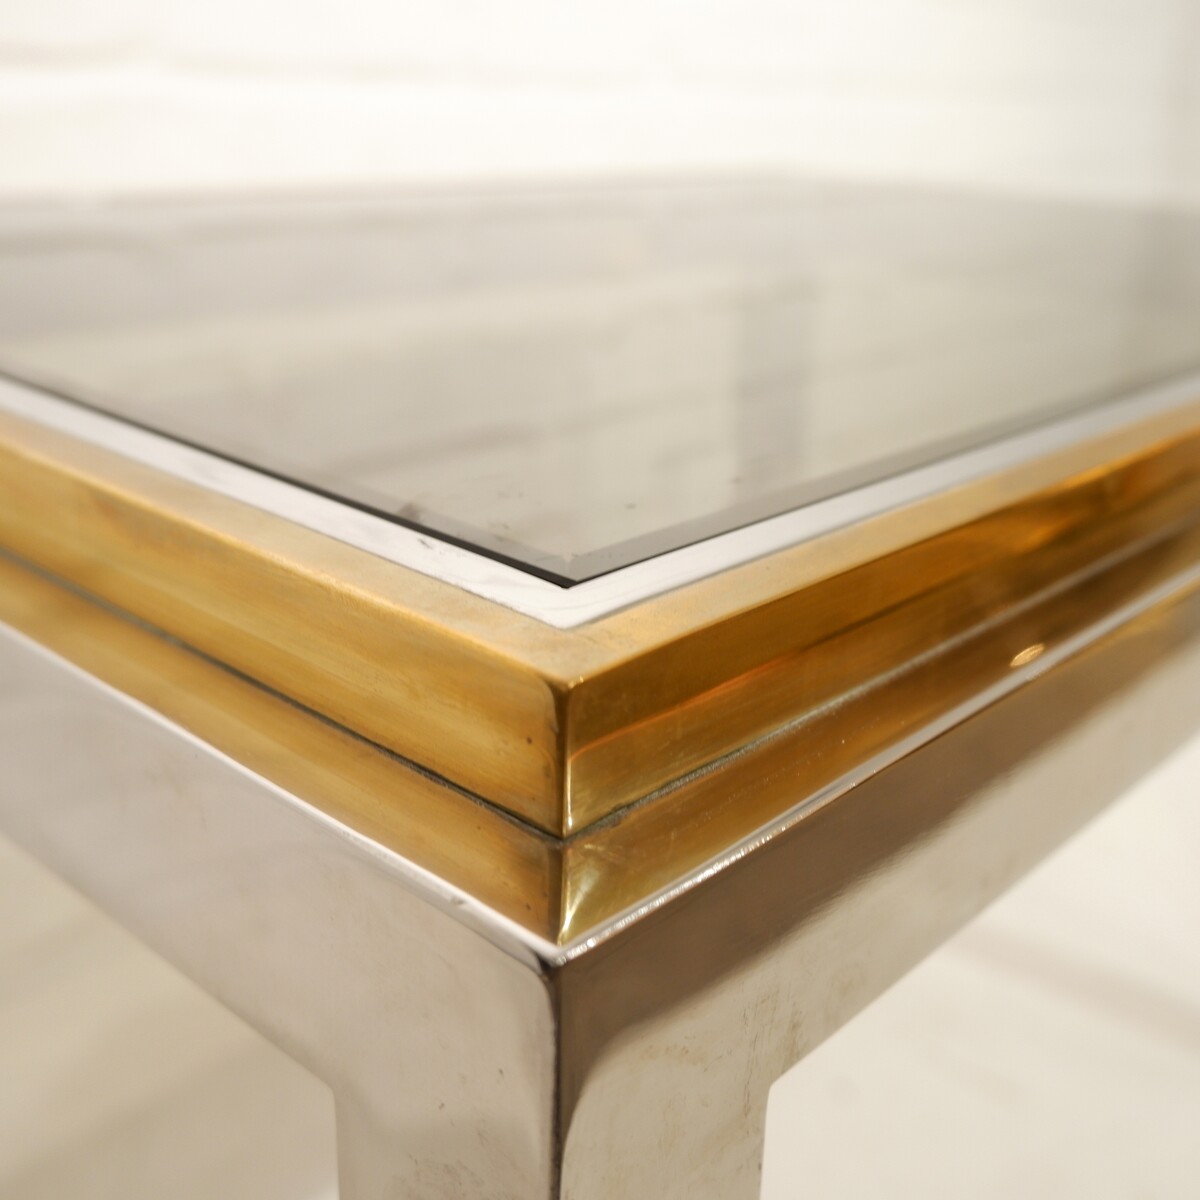 Maison Jean Charles pair of Coffee Tables Chrome & Brass, Signed, 1970s